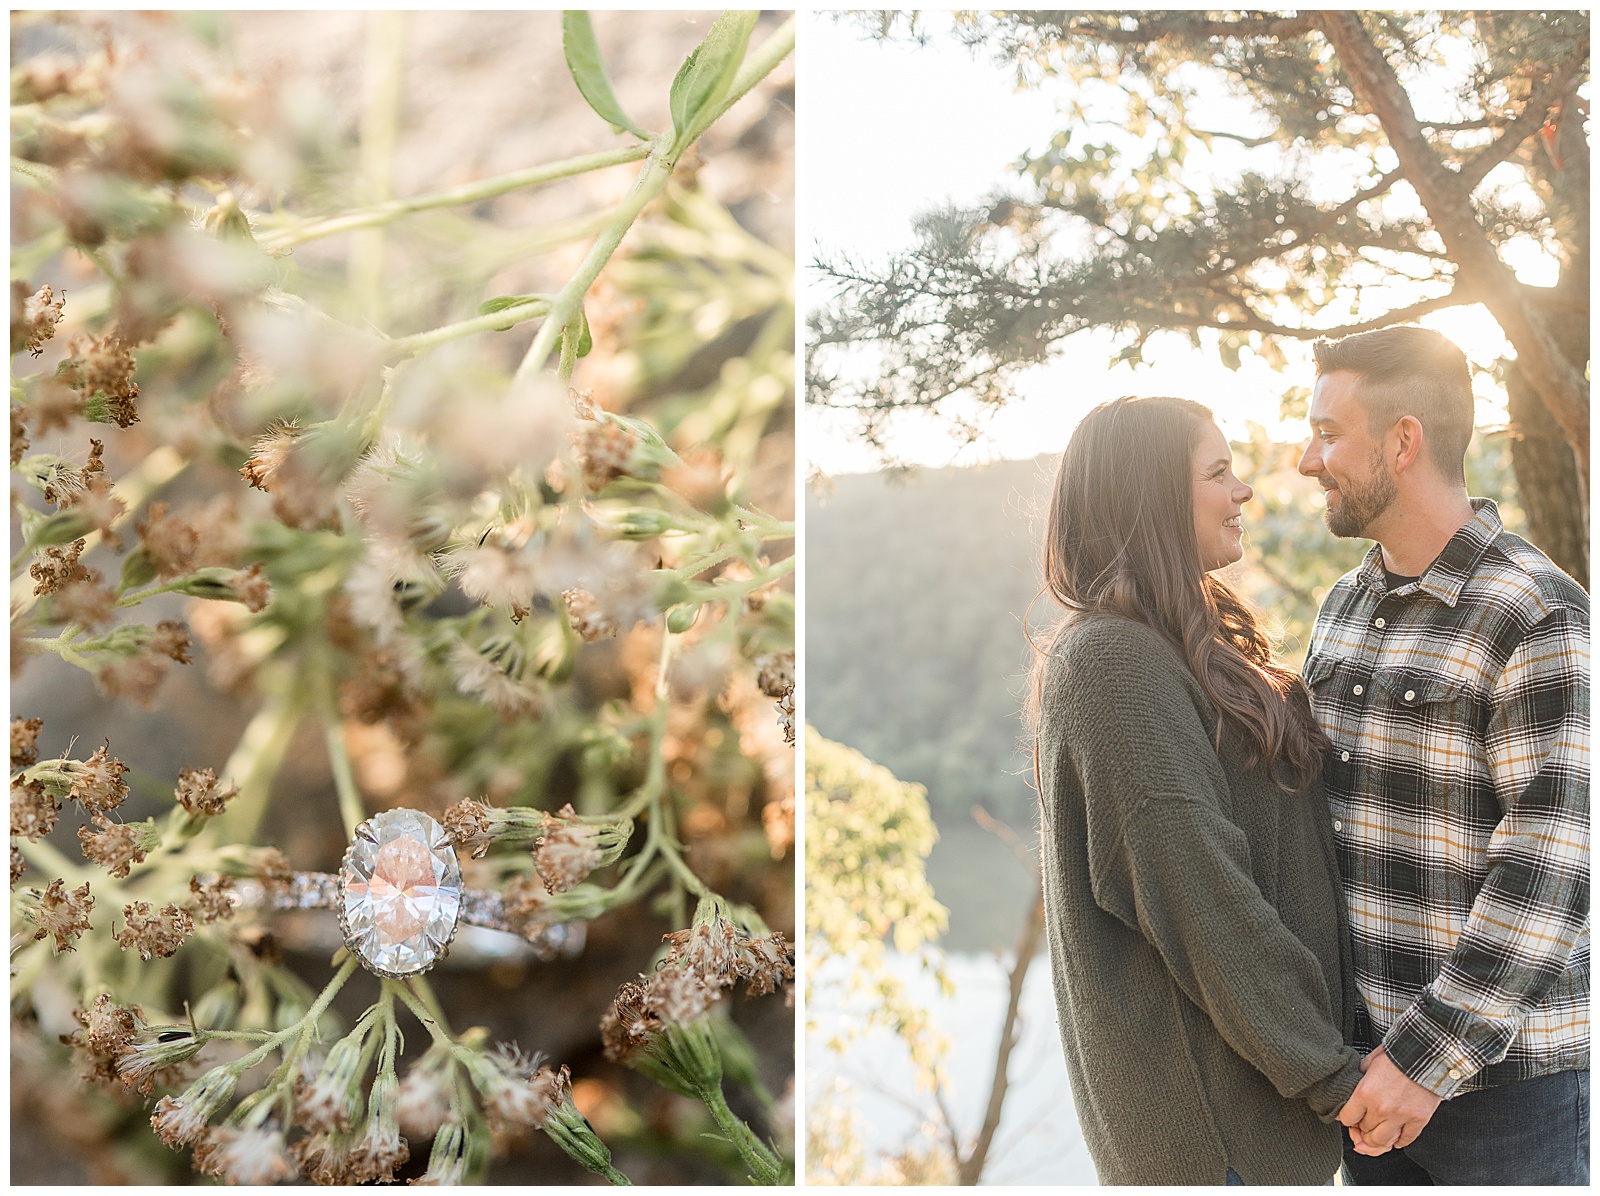 diamond engagement ring resting in greenery on sunny fall day in pennsylvania